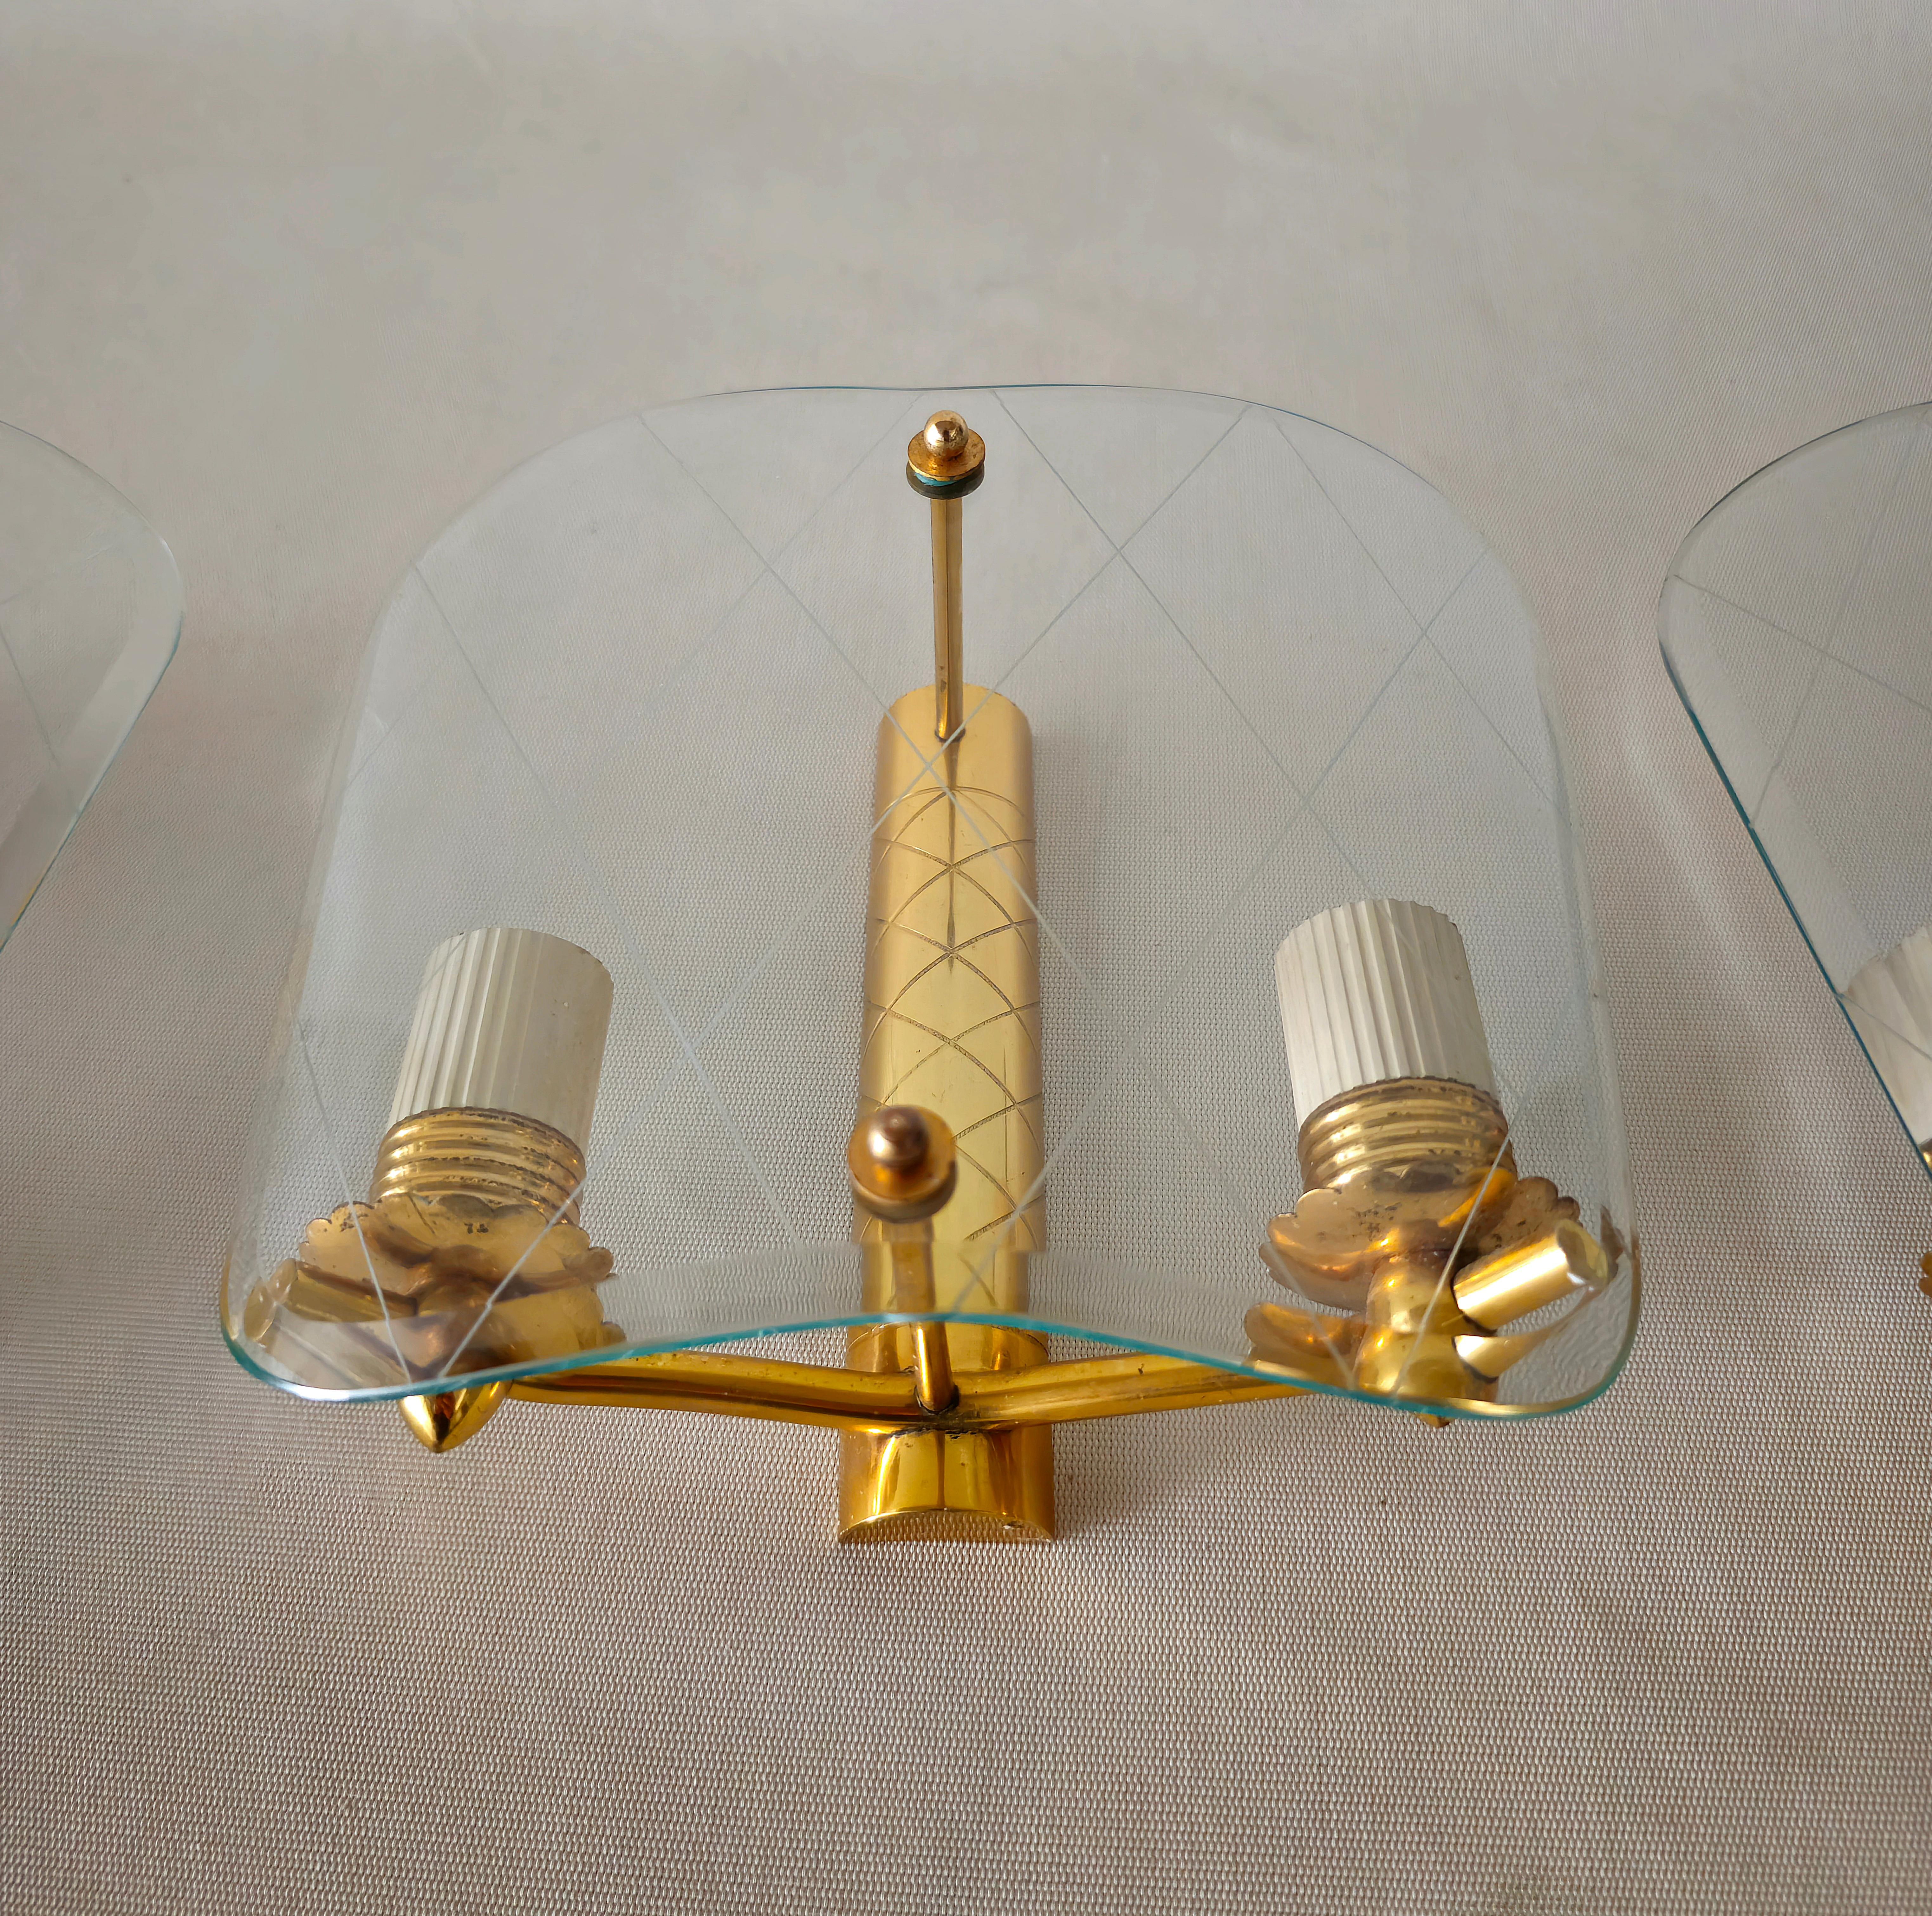 3 Wall Lights Sconces Brass Decorated Glass Midcentury Italian Design 1950 For Sale 4